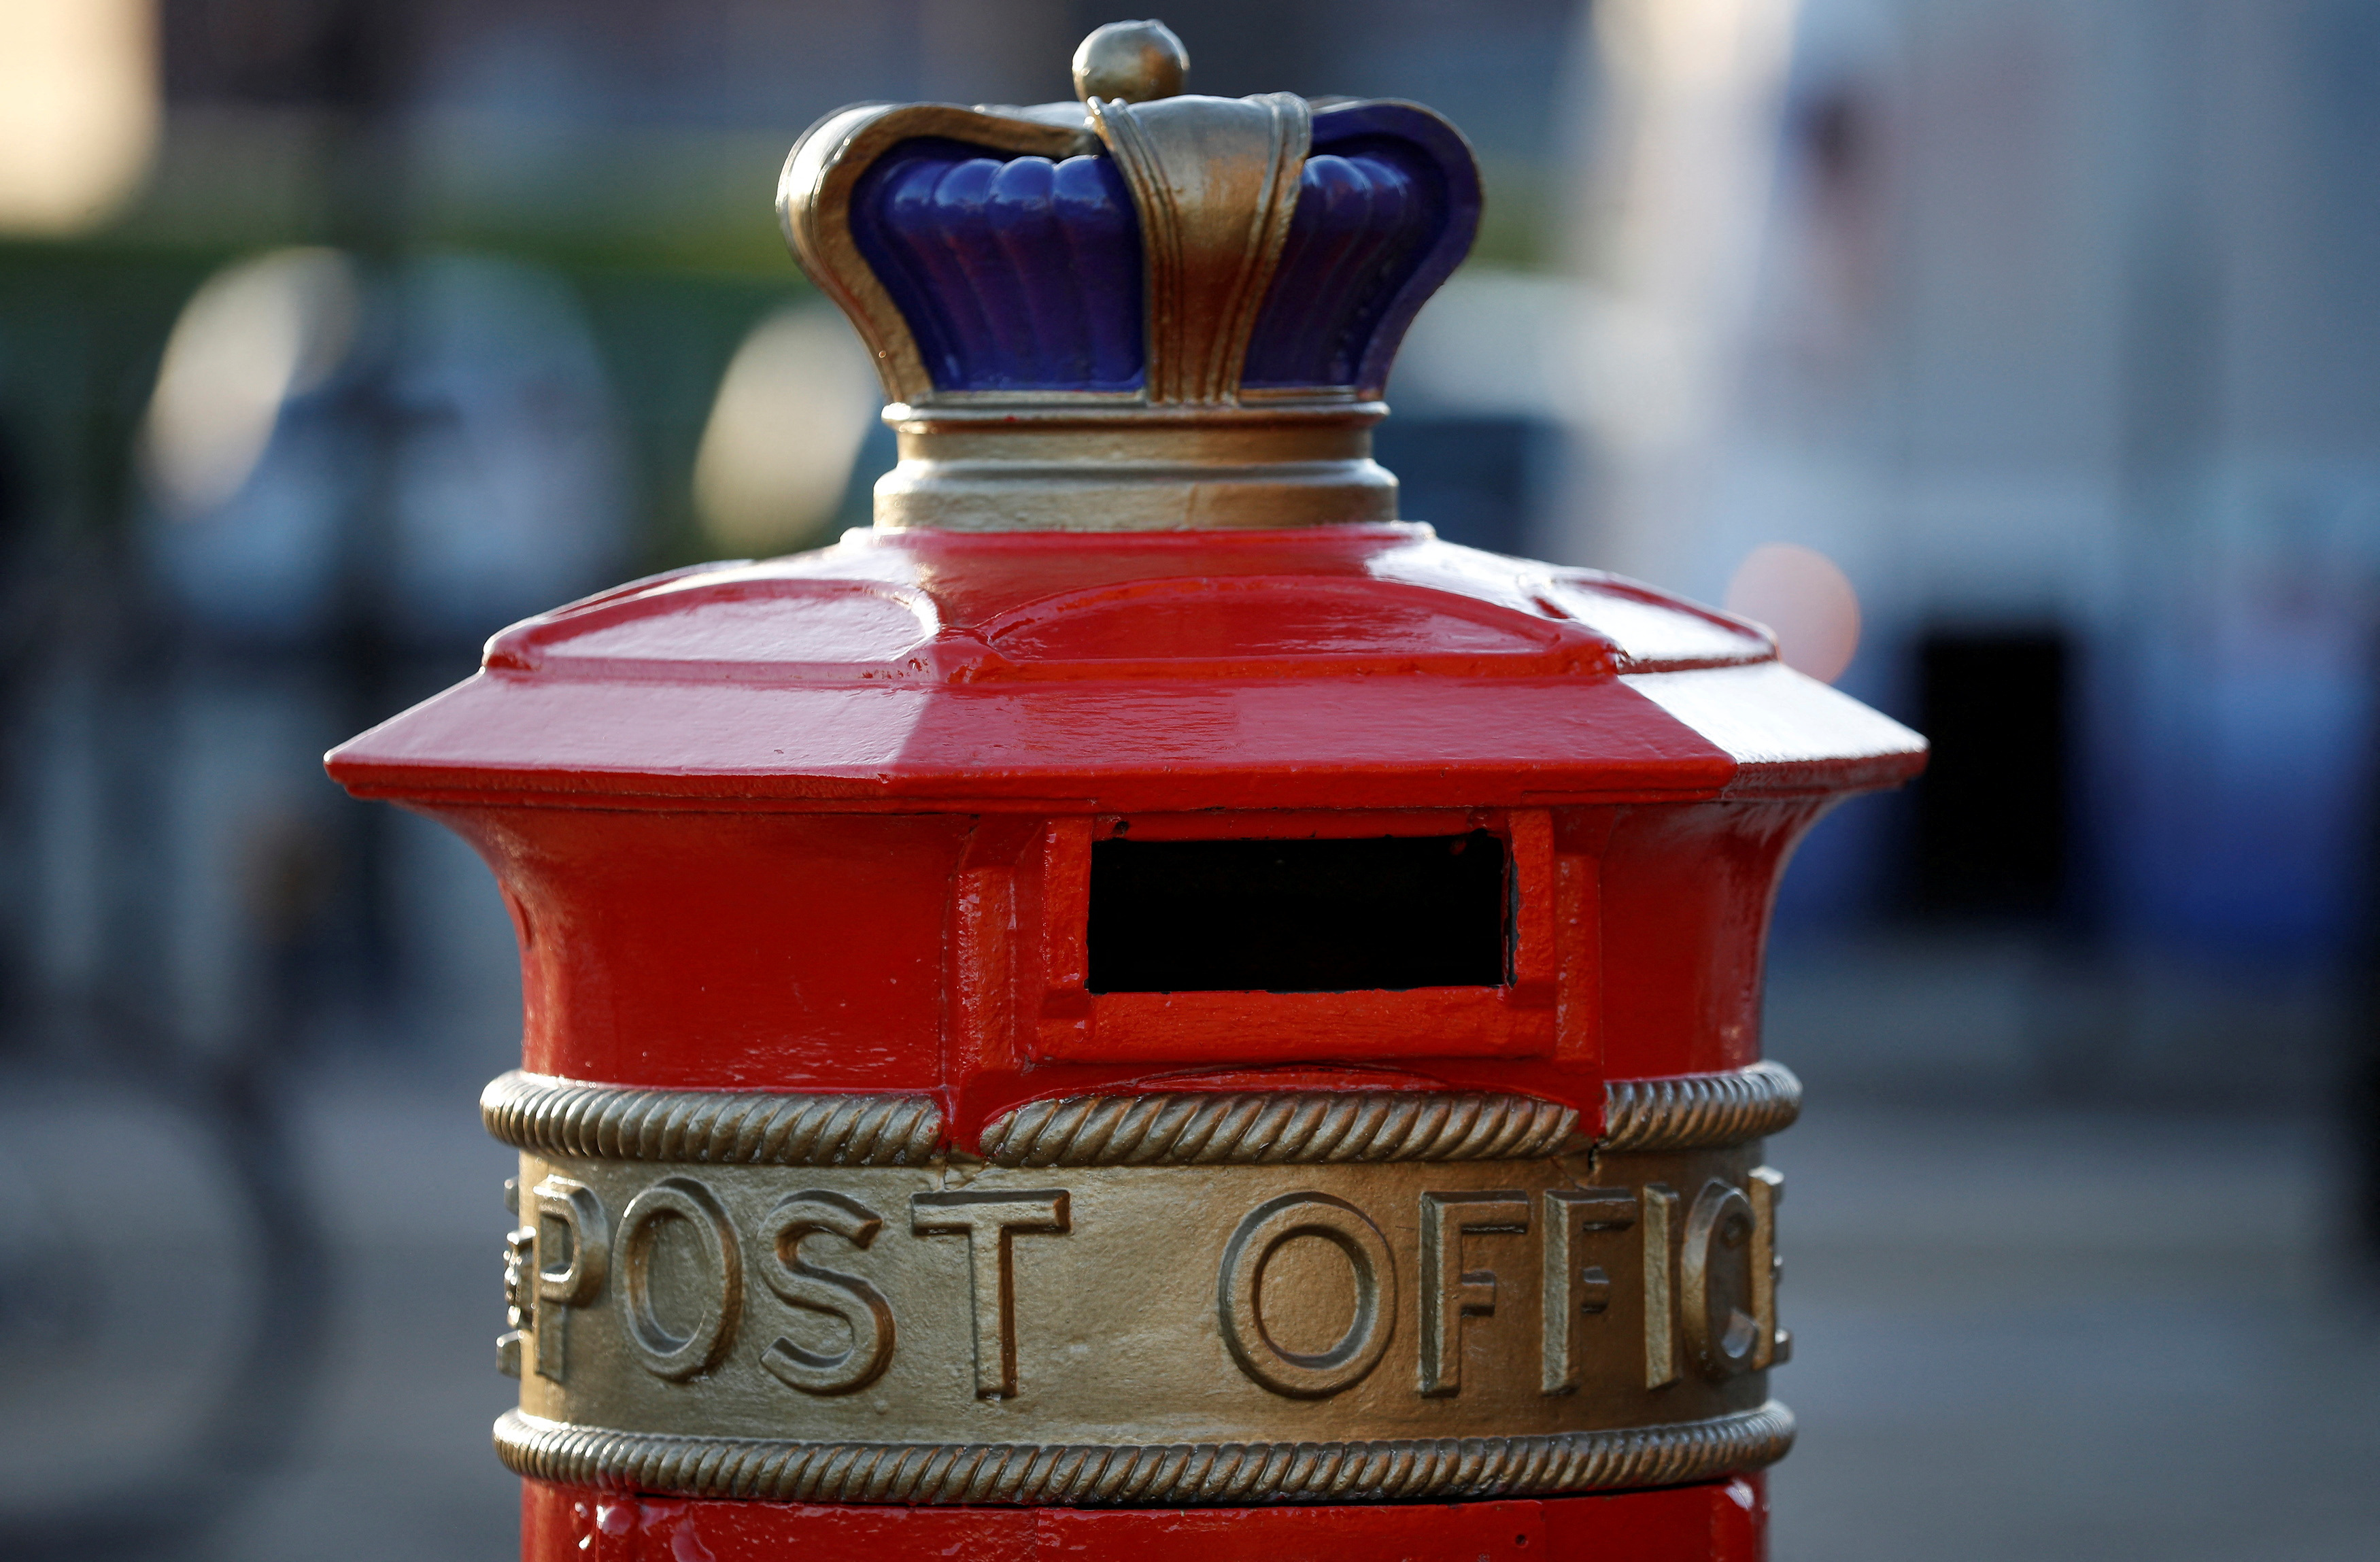 An ornate Royal Mail post box with Post Office written on it in Liverpool